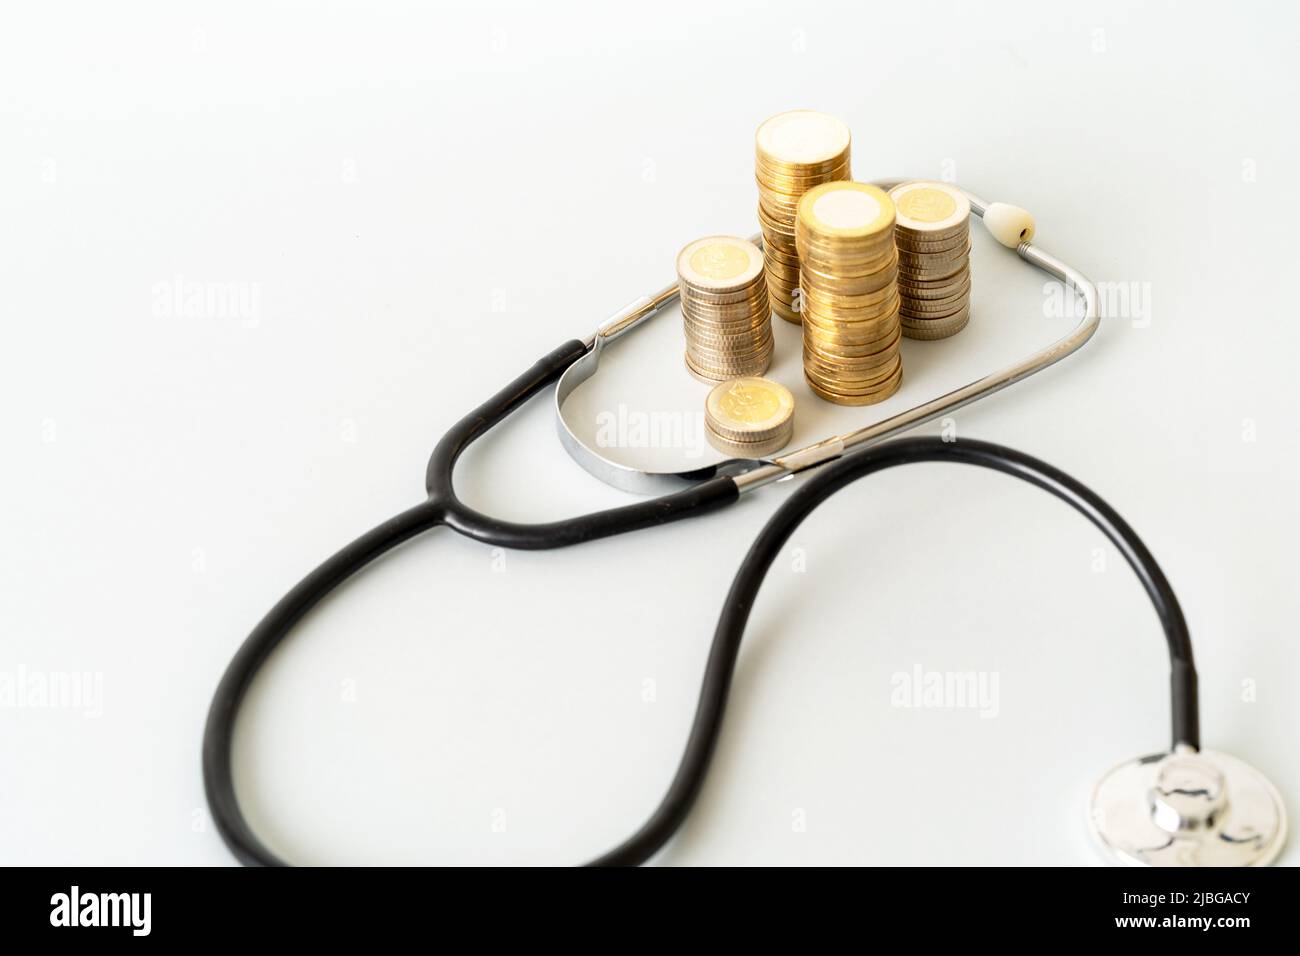 Close up photo of stethoscope and stacked coins on isolated background. Concept of rising costs of healthcare expenses. Stock Photo